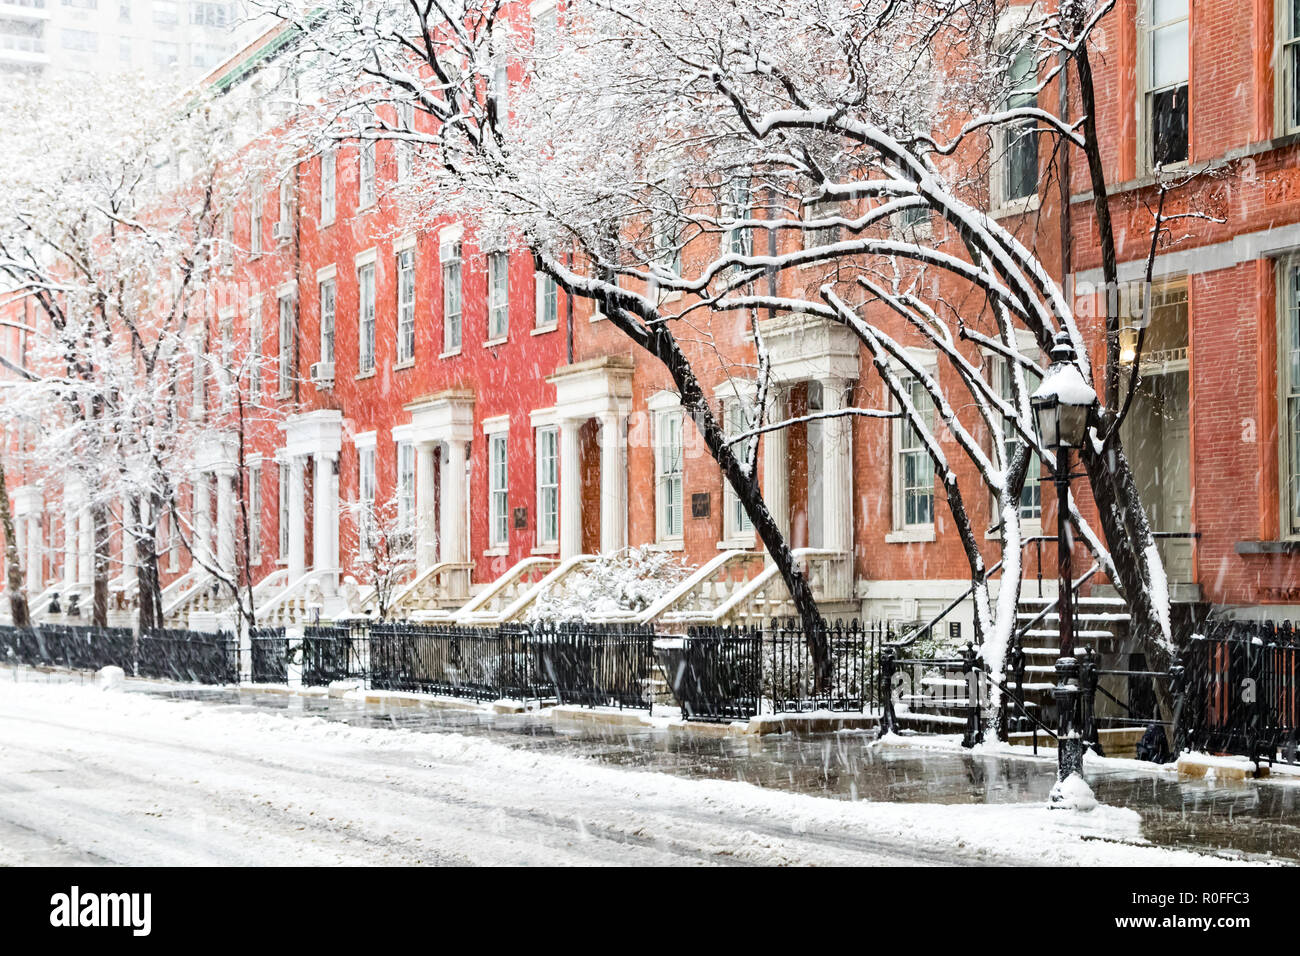 Snow covered winter street scene with view of the historic buildings along Washington Square Park in New York City after nor'easter storm Stock Photo